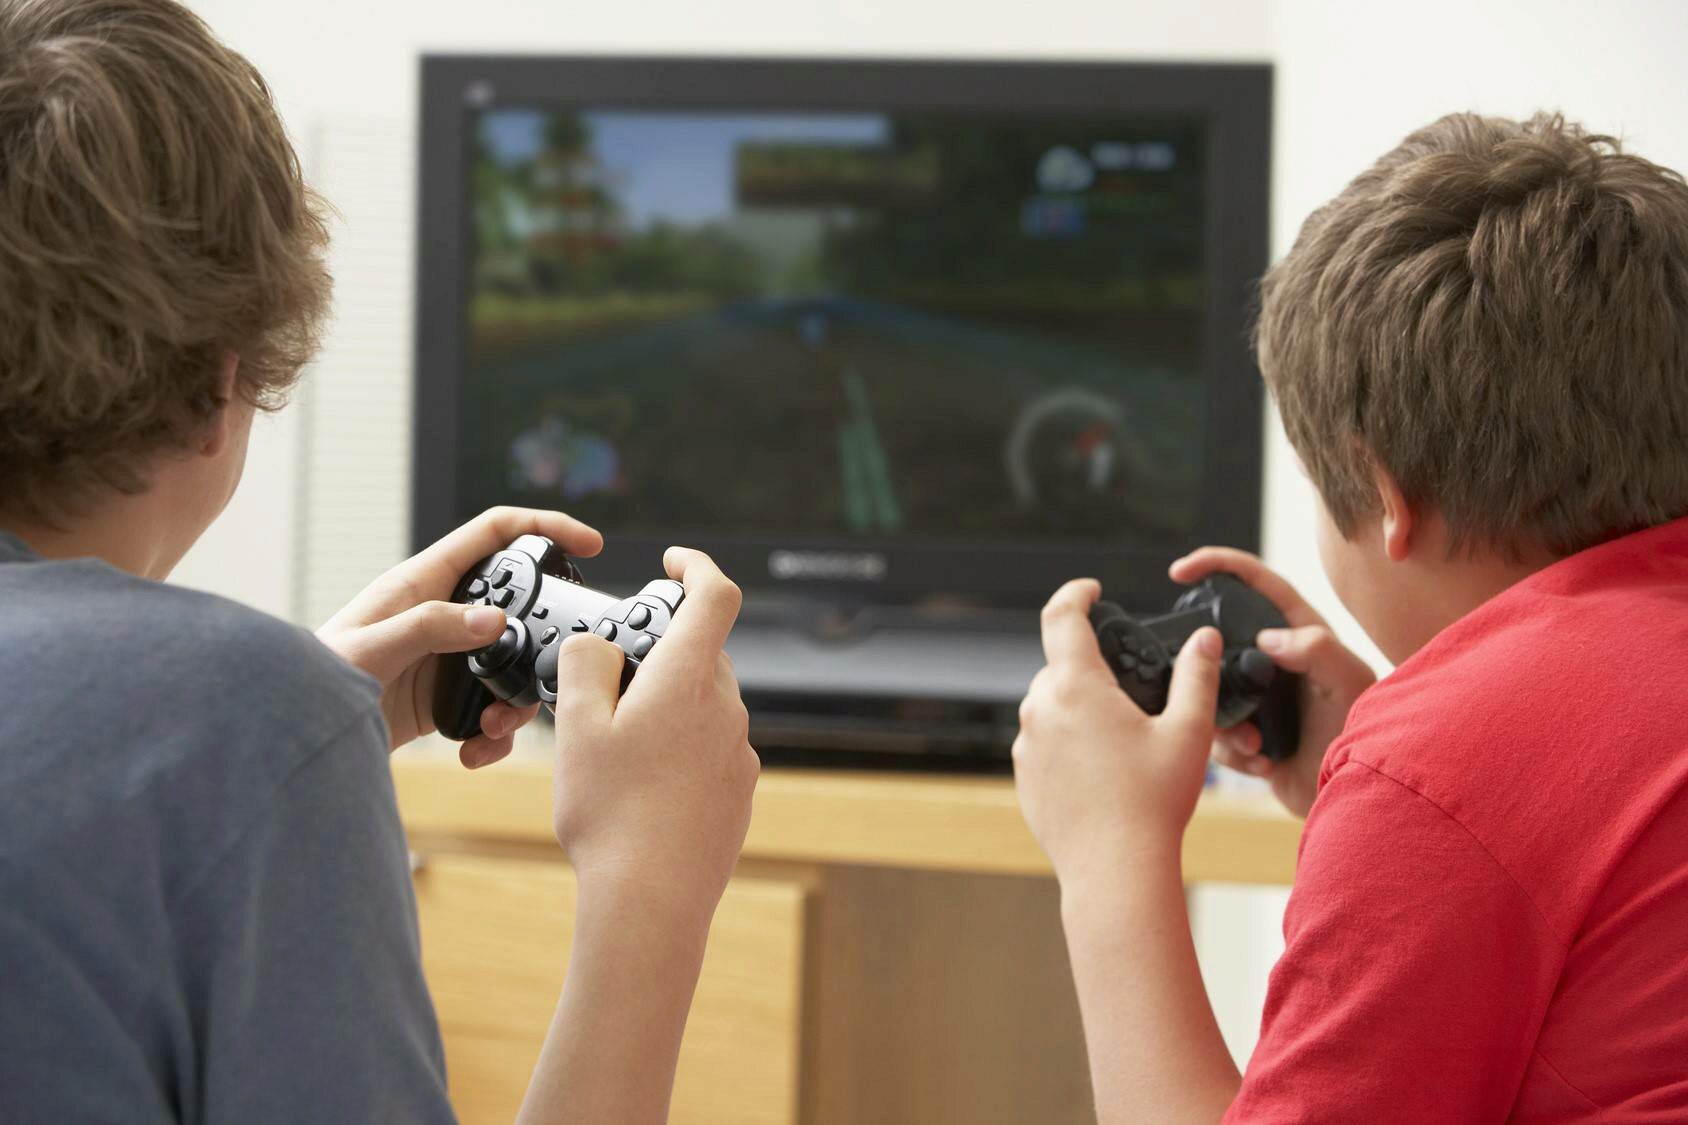 Children Playing with Game Console